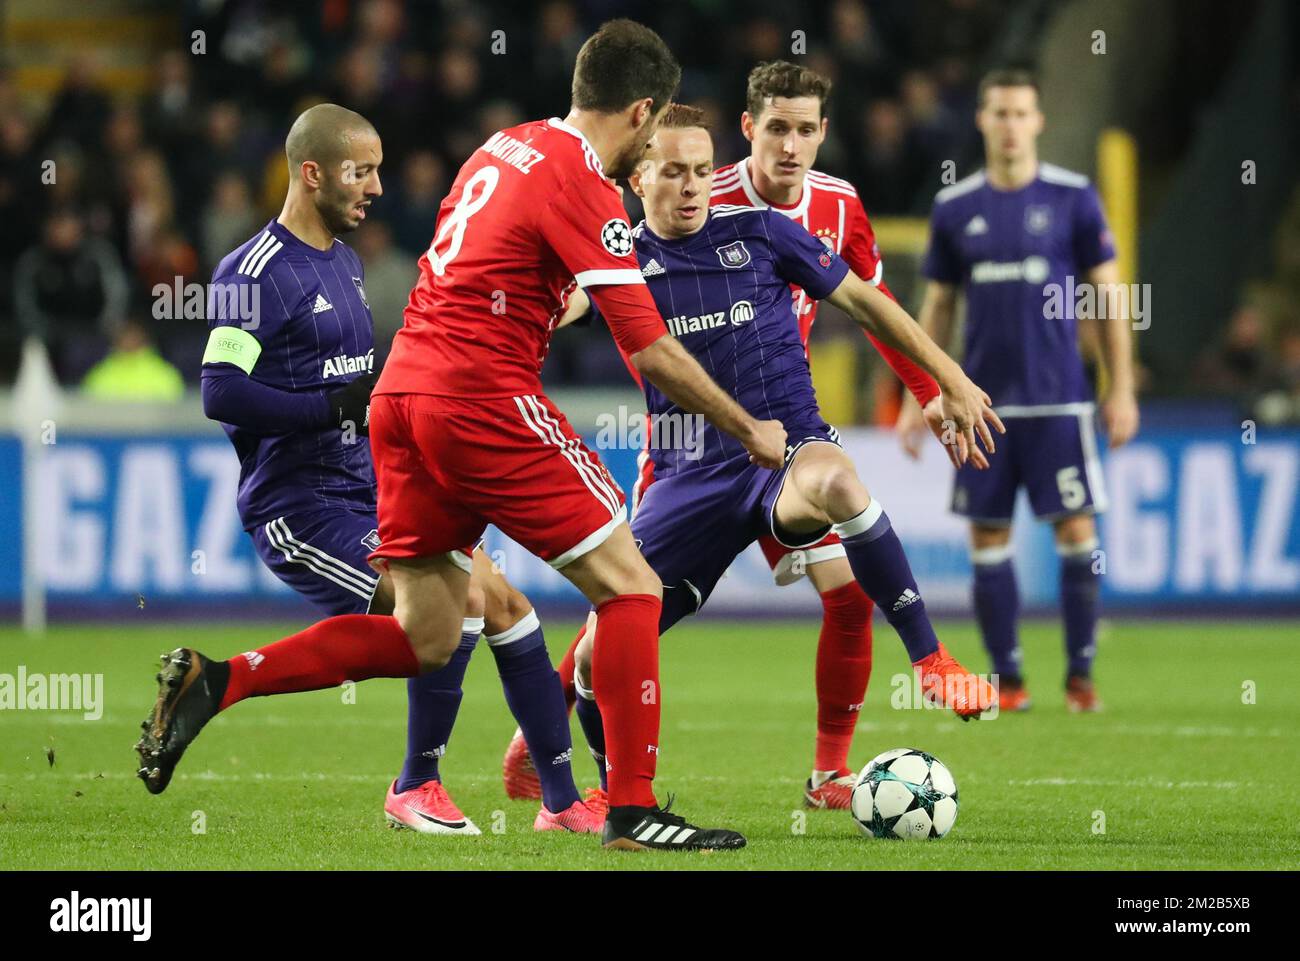 Bayern's Javi Martinez and Anderlecht's Adrien Trebel fight for the ball during a soccer match between Belgian club RSC Anderlecht and German team FC Bayern Munchen, Wednesday 22 November 2017 in Brussels, game five out of six in the group stage (Group B) of the UEFA Champions League competition. BELGA PHOTO VIRGINIE LEFOUR Stock Photo